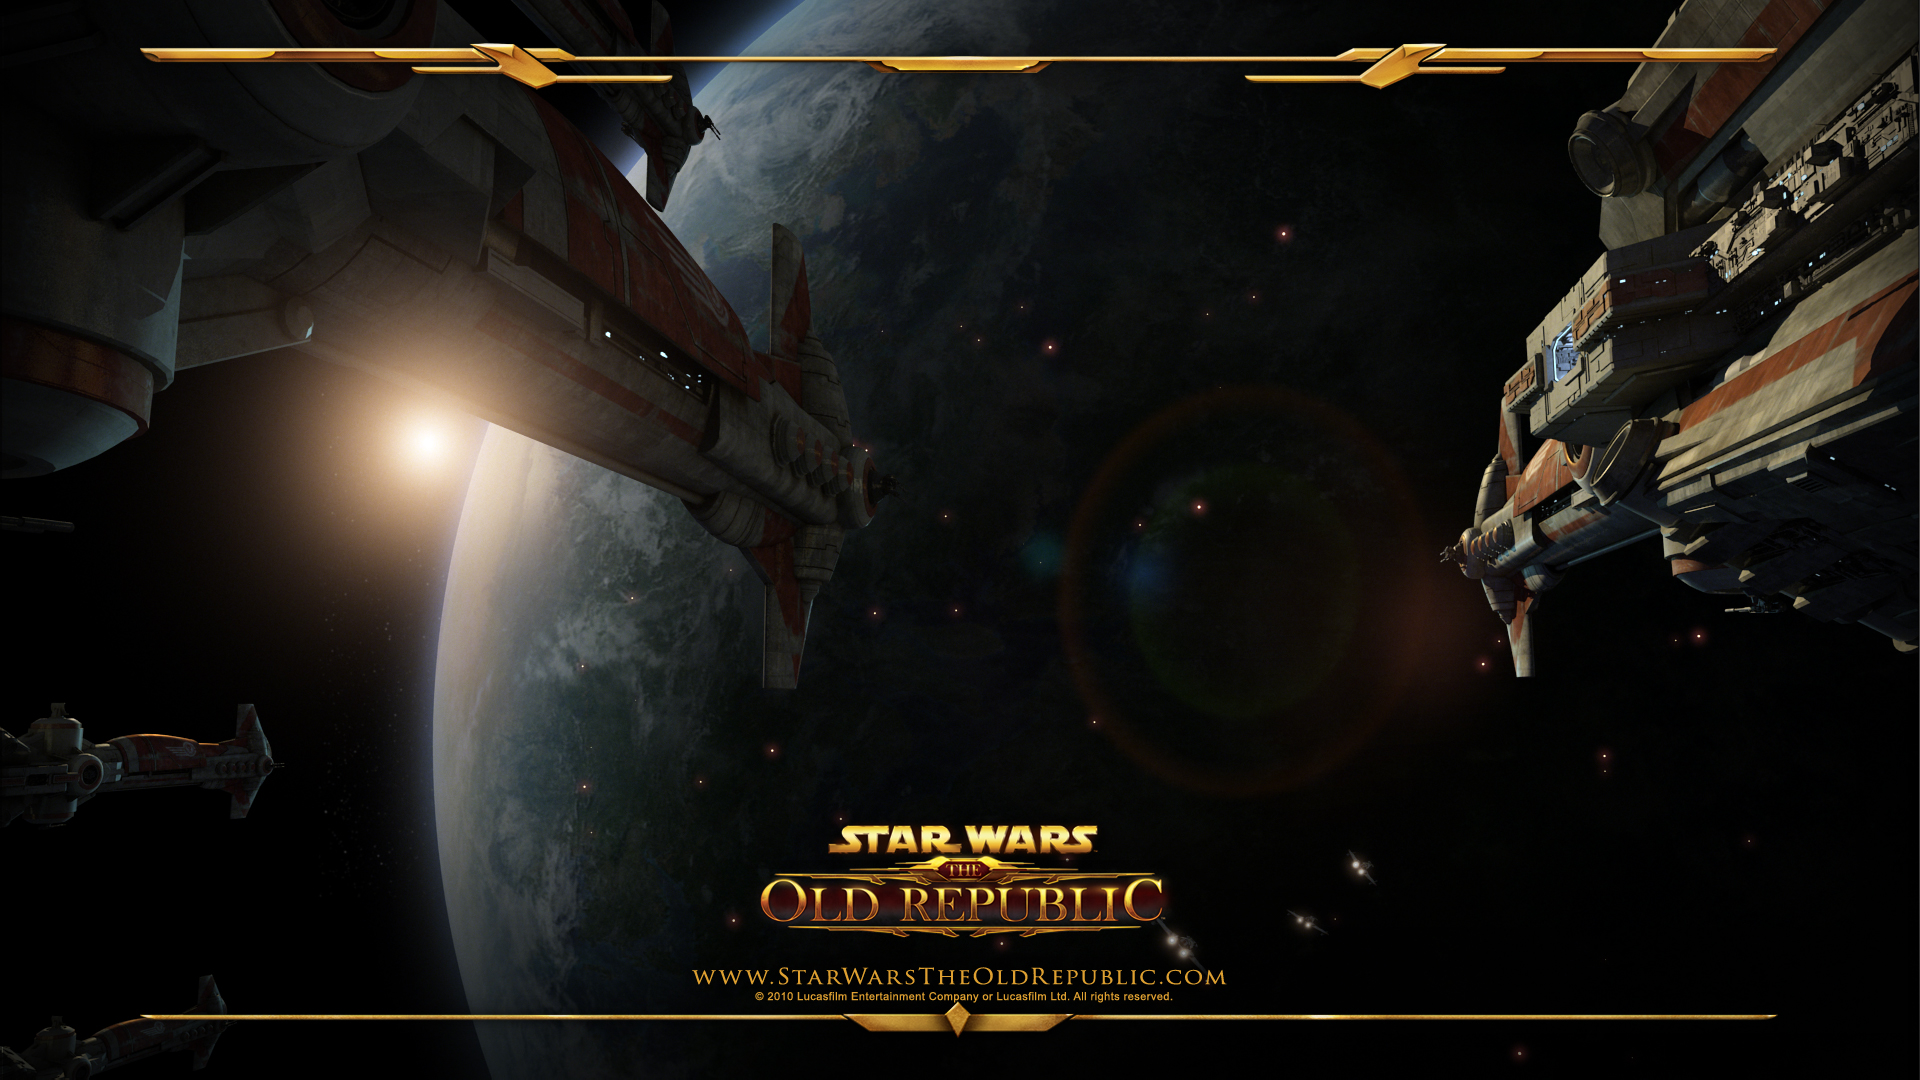 Swtor Wallpapers Star Wars The Old Republig Blog Fansite